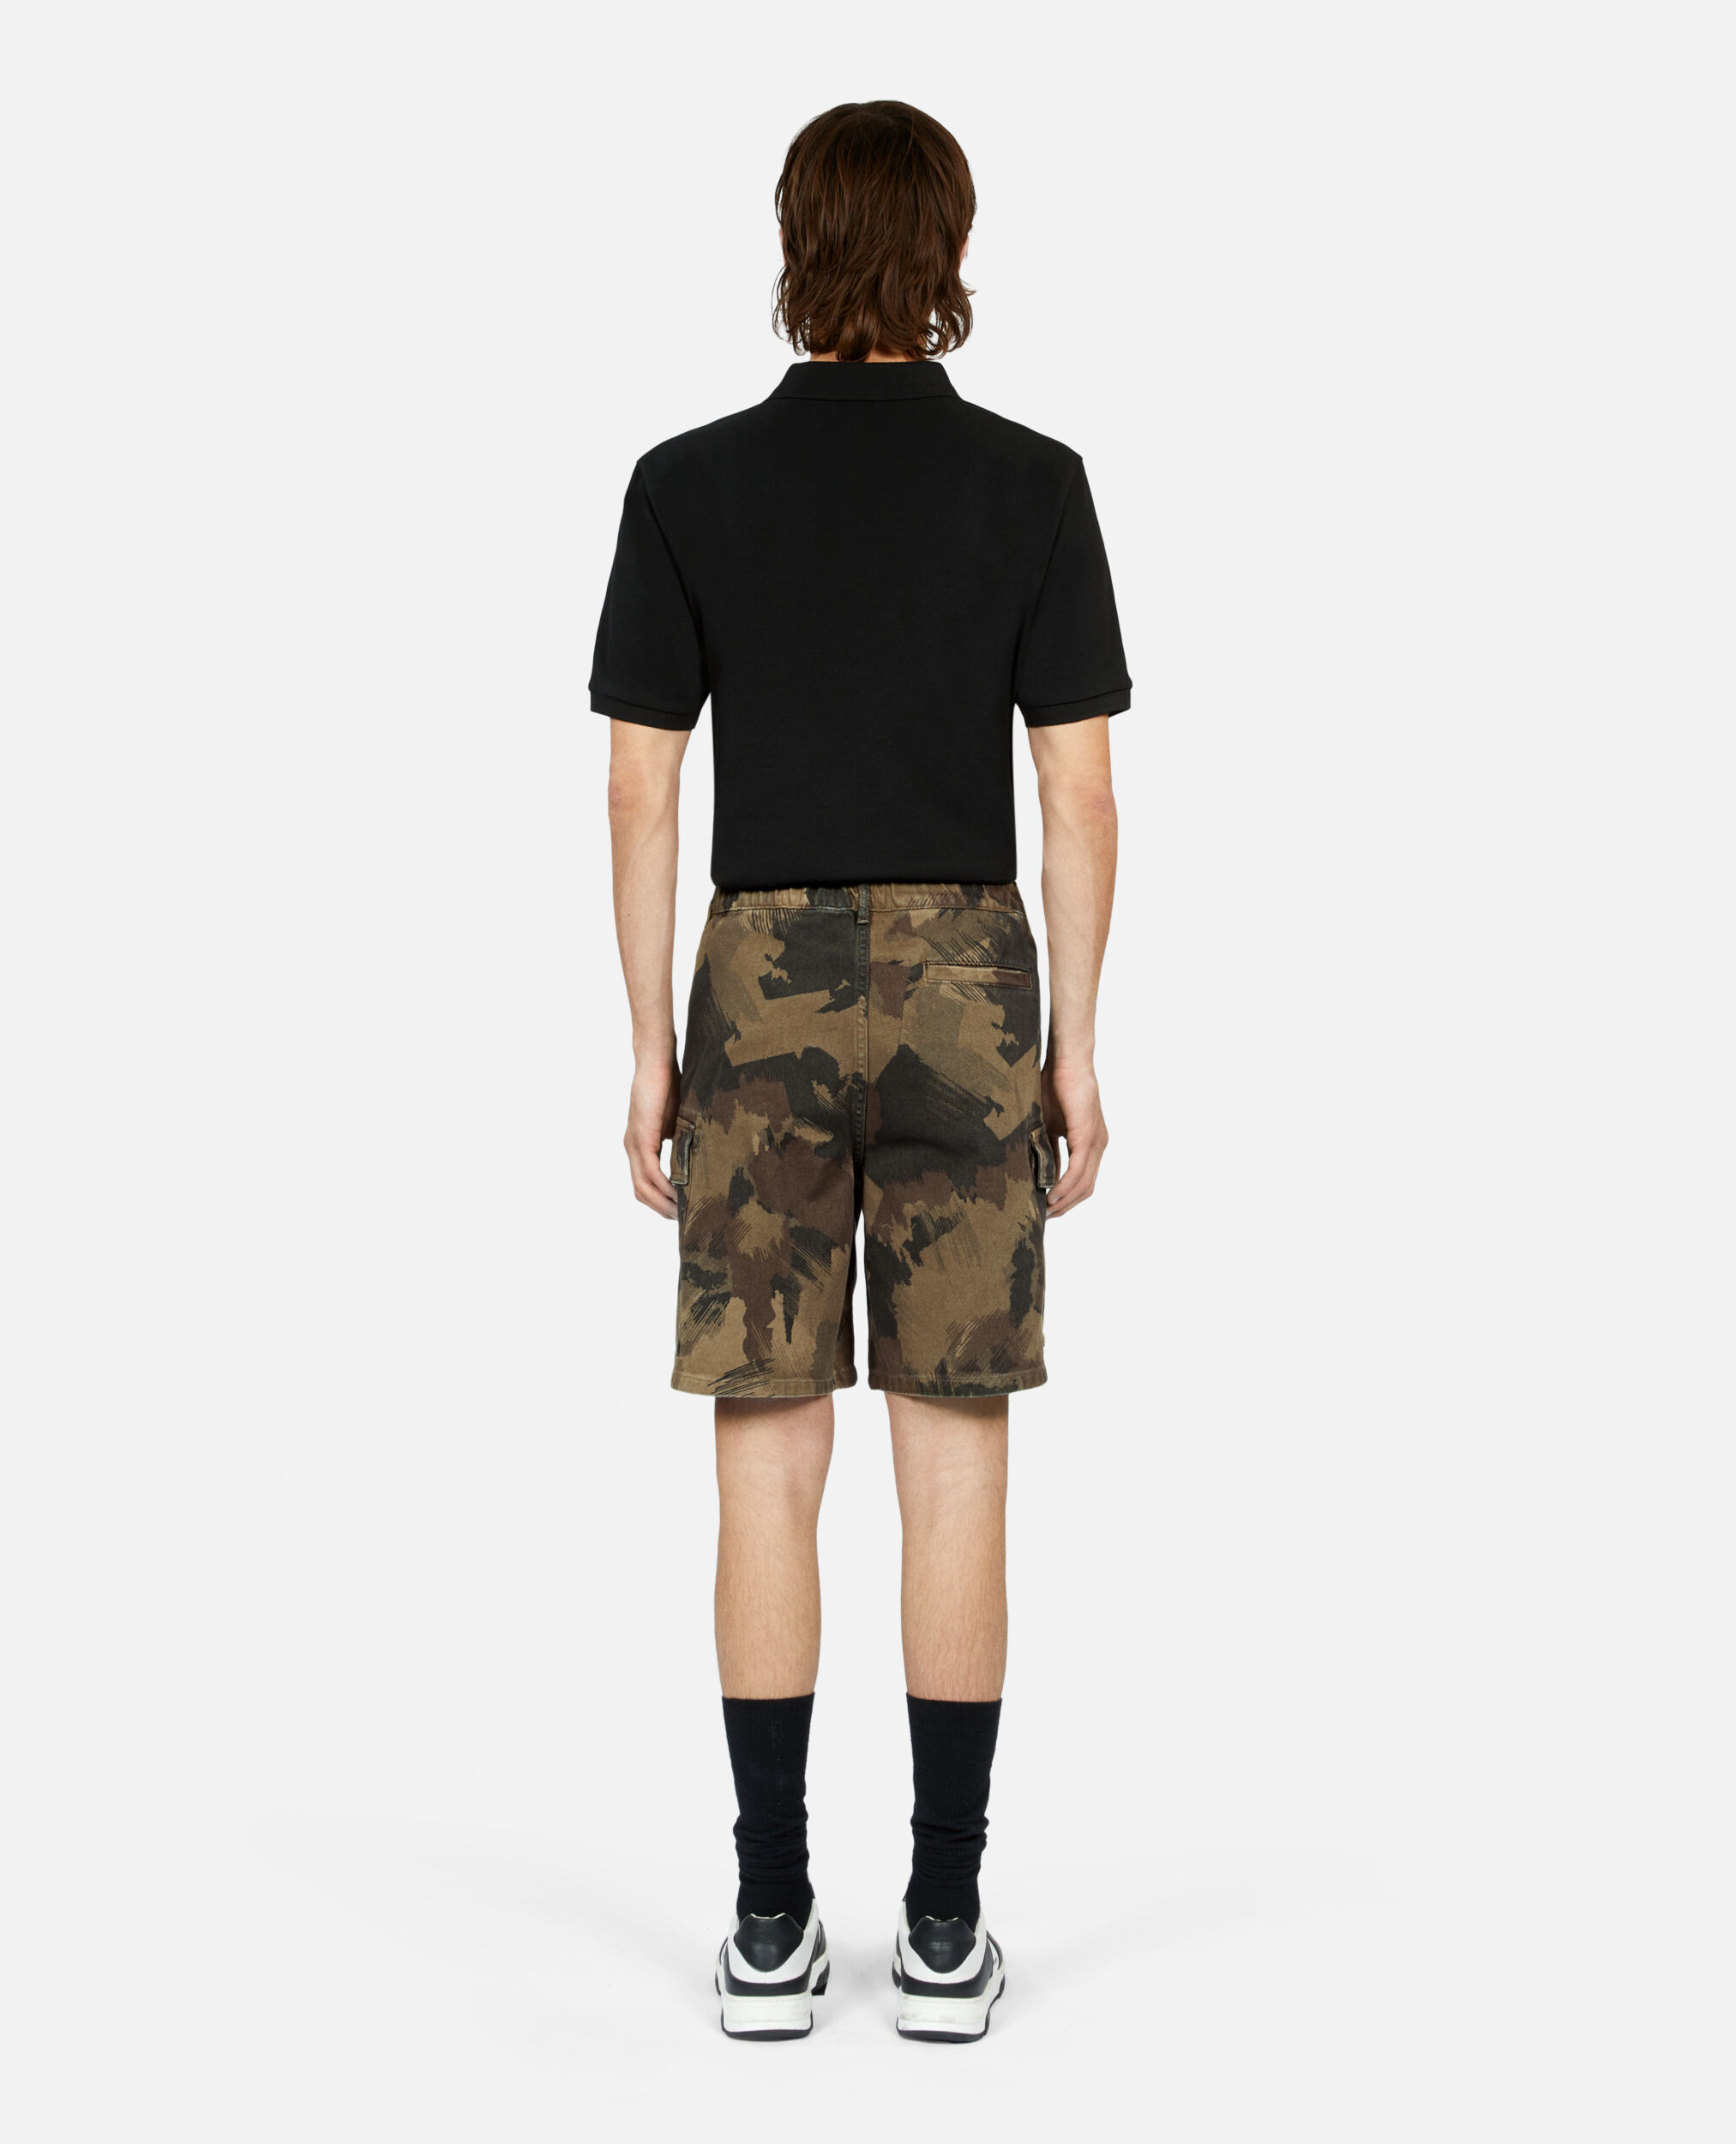 Cargoshorts in Camouflage, CAMOUFLAGE, hi-res image number null